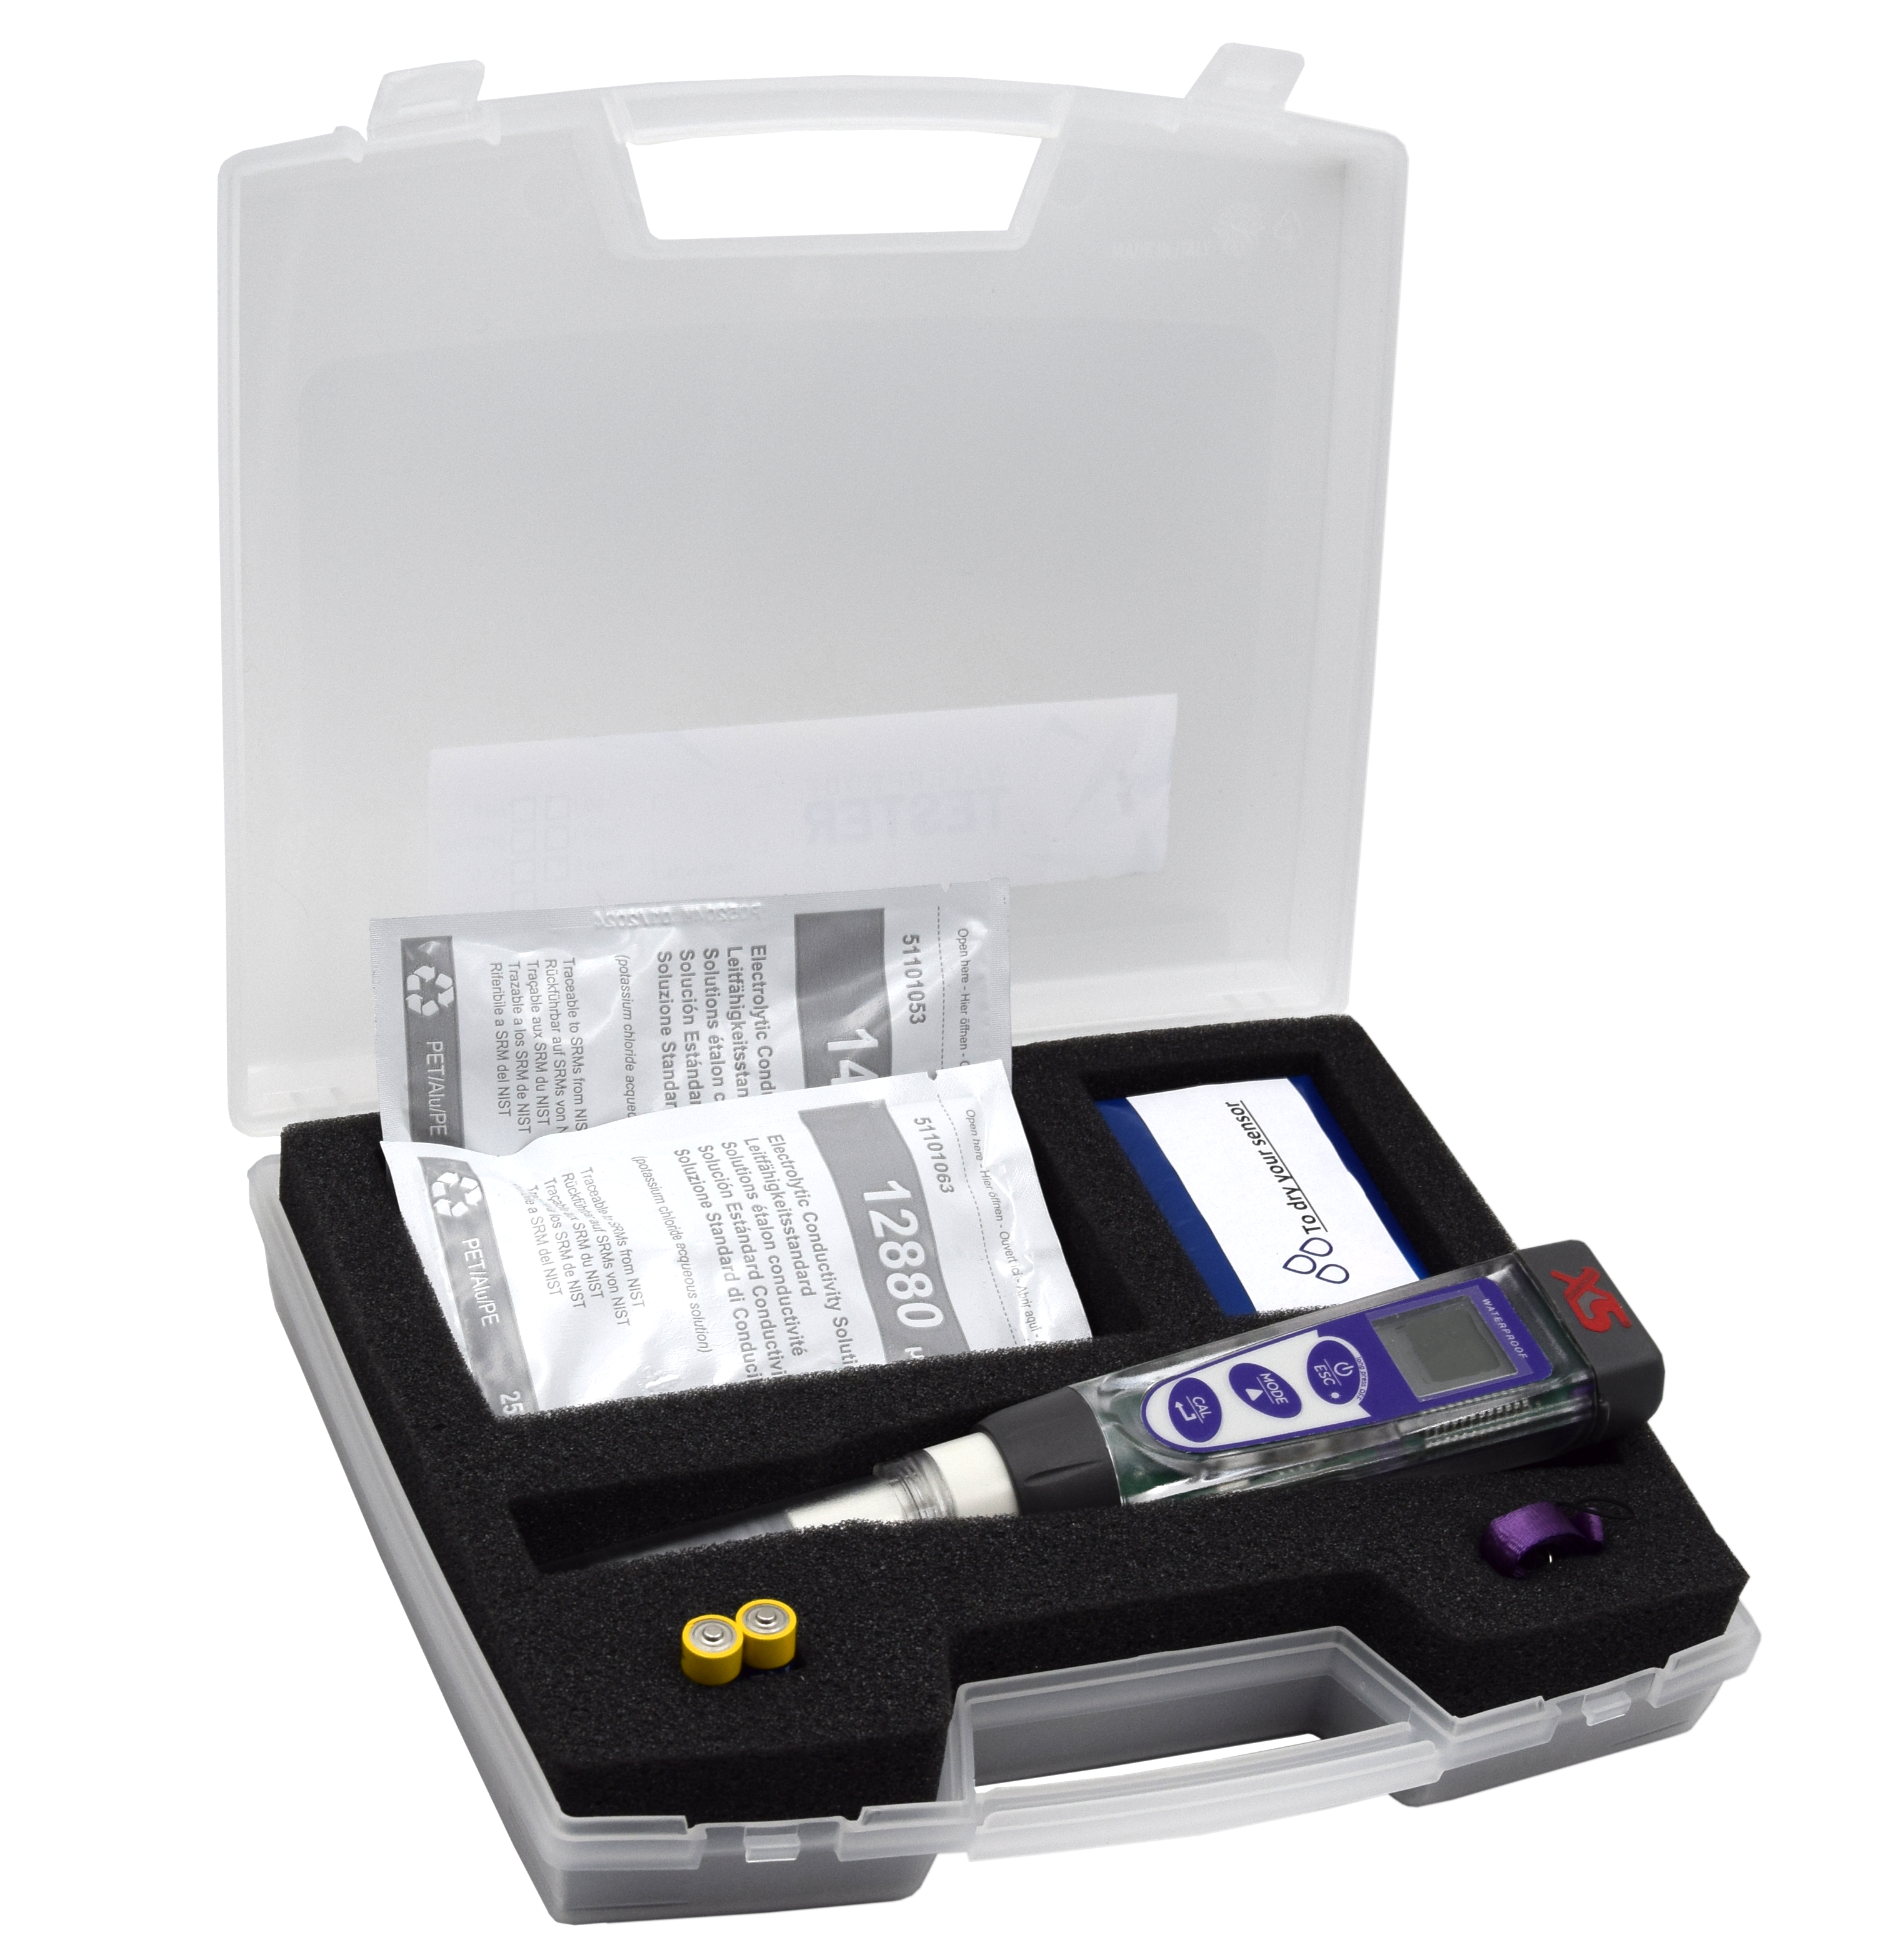 XS COND 5 Tester in carrying case  -  Handmeter for Conductivity/TDS/Salinity/Temperature